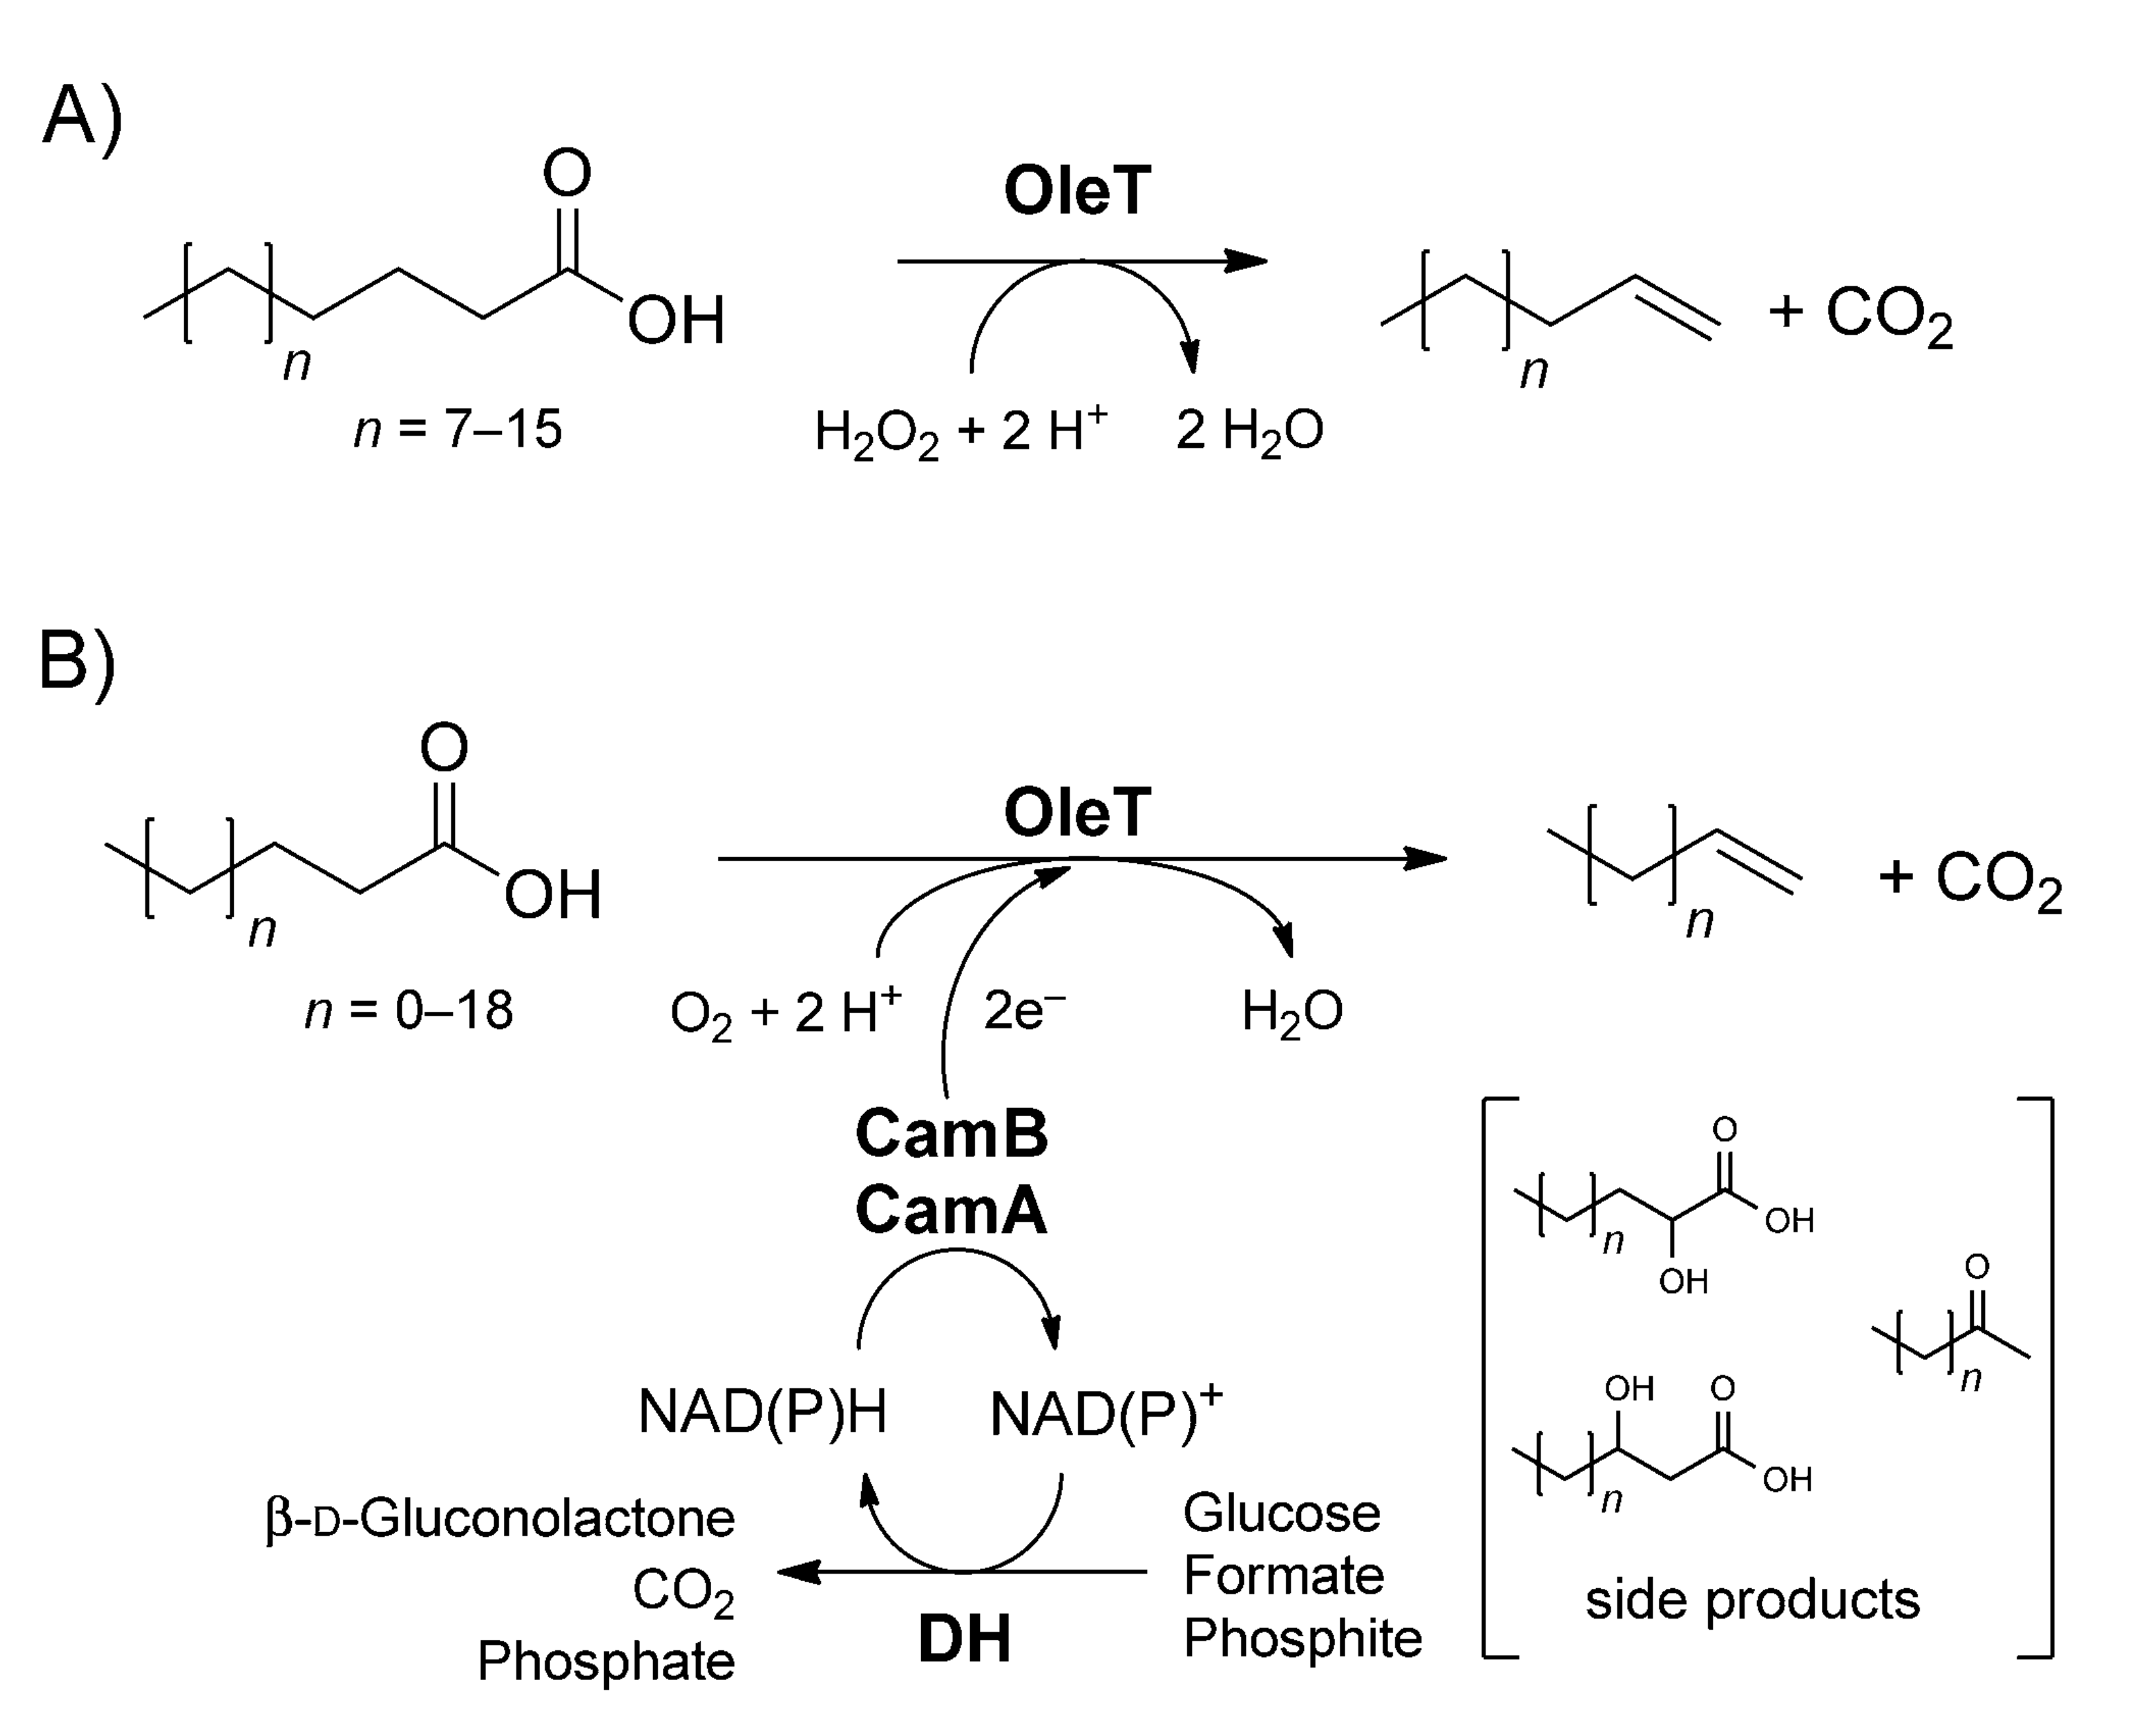 Oxidative decarboxylation of fatty acids with OleT. Path A uses H2O2 via the peroxide shunt, whereas path B uses O2 and NAD(P)H